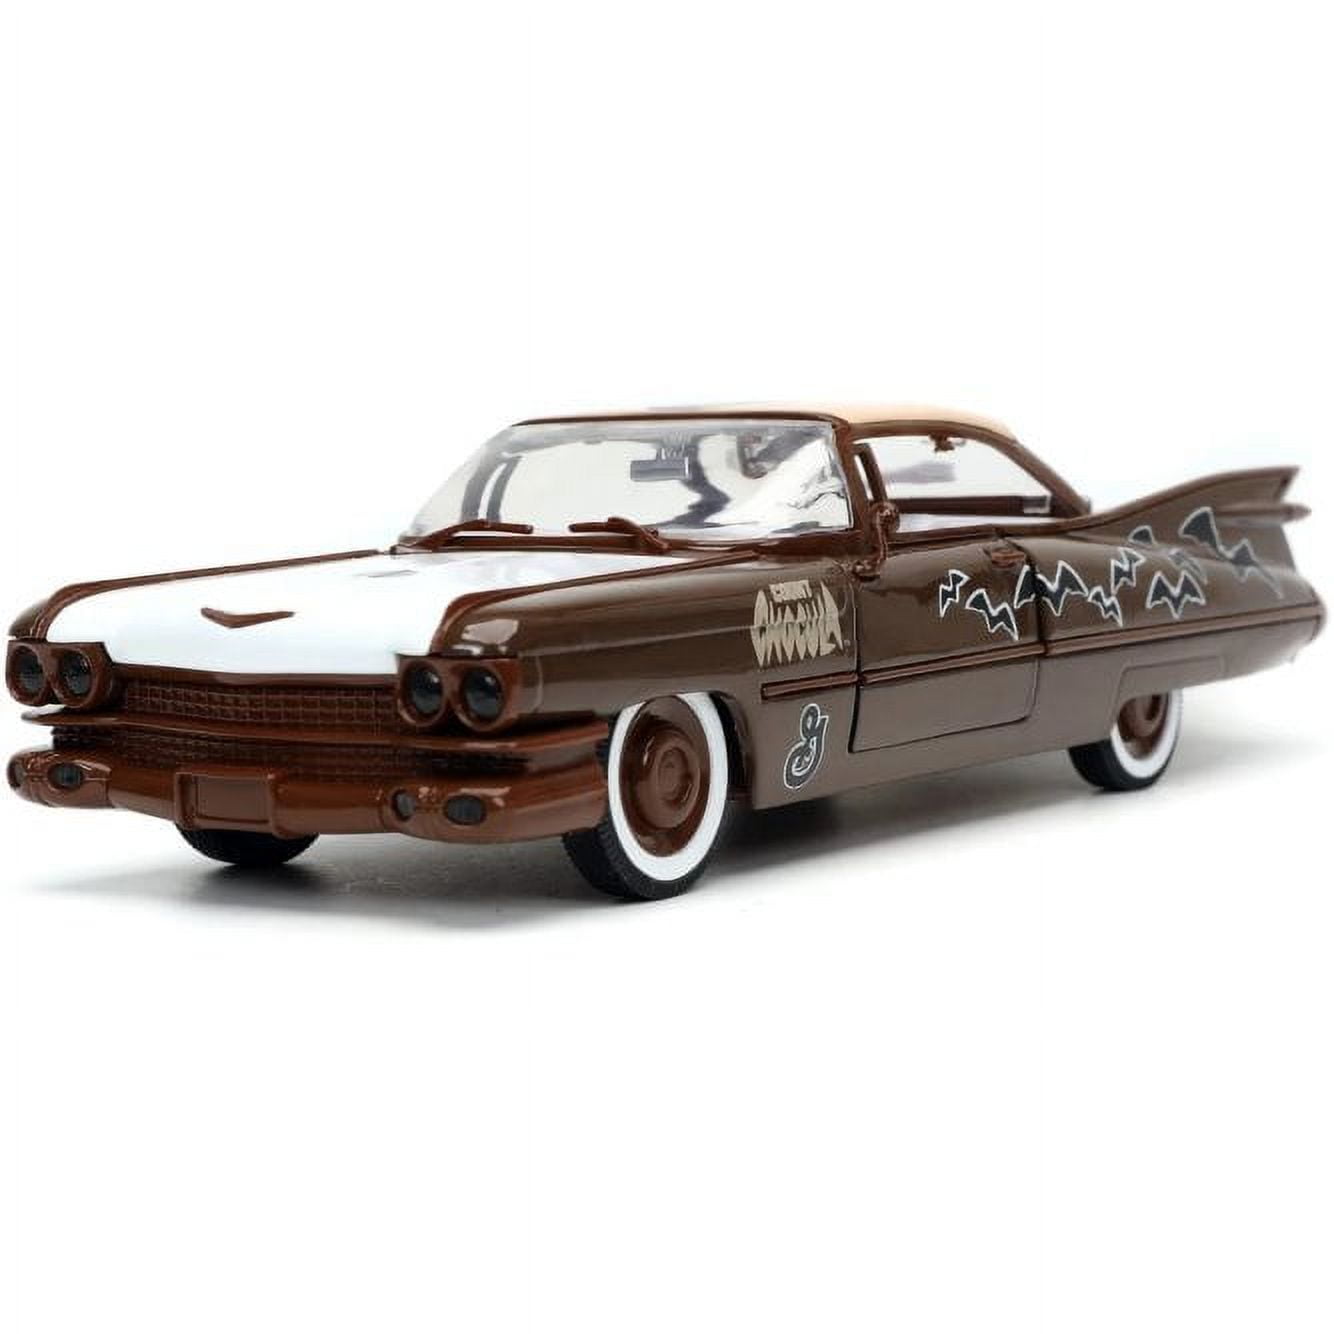 1959 Cadillac Coupe DeVille w/ Count Chocula Figurine, Brown